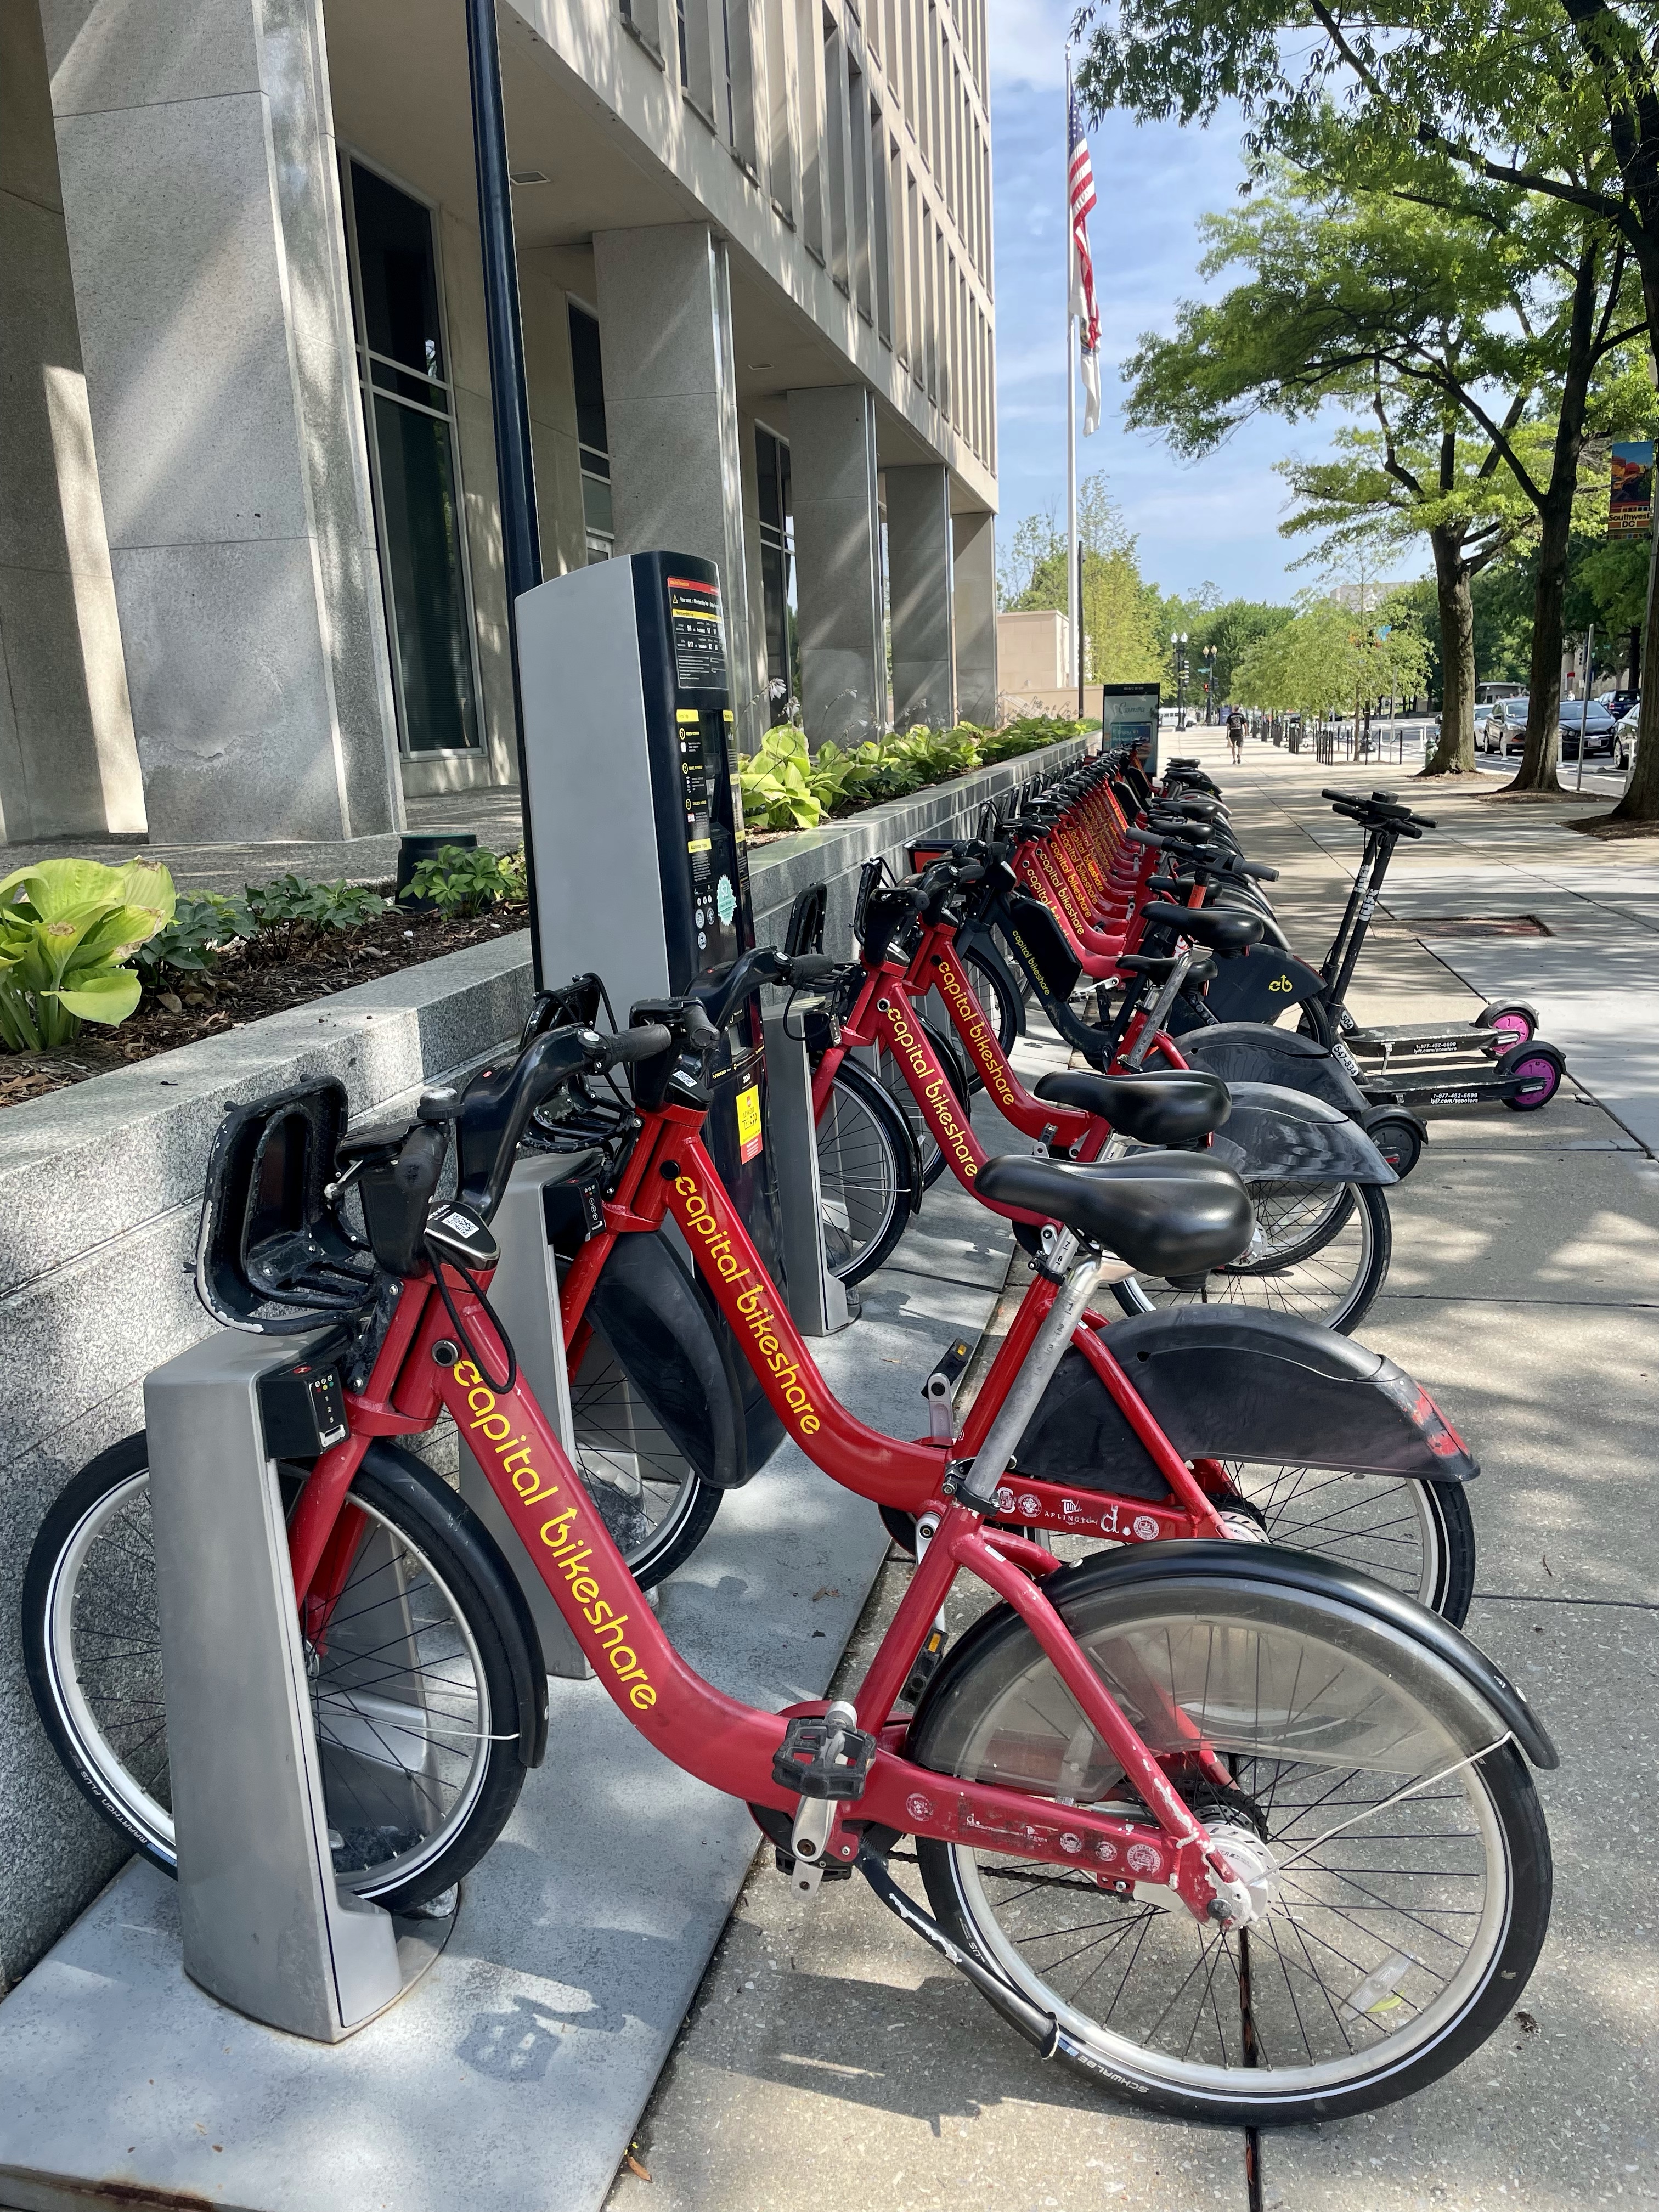 5 Reasons to use the Capital Bike Share – the Best way to get around Washington D.C.